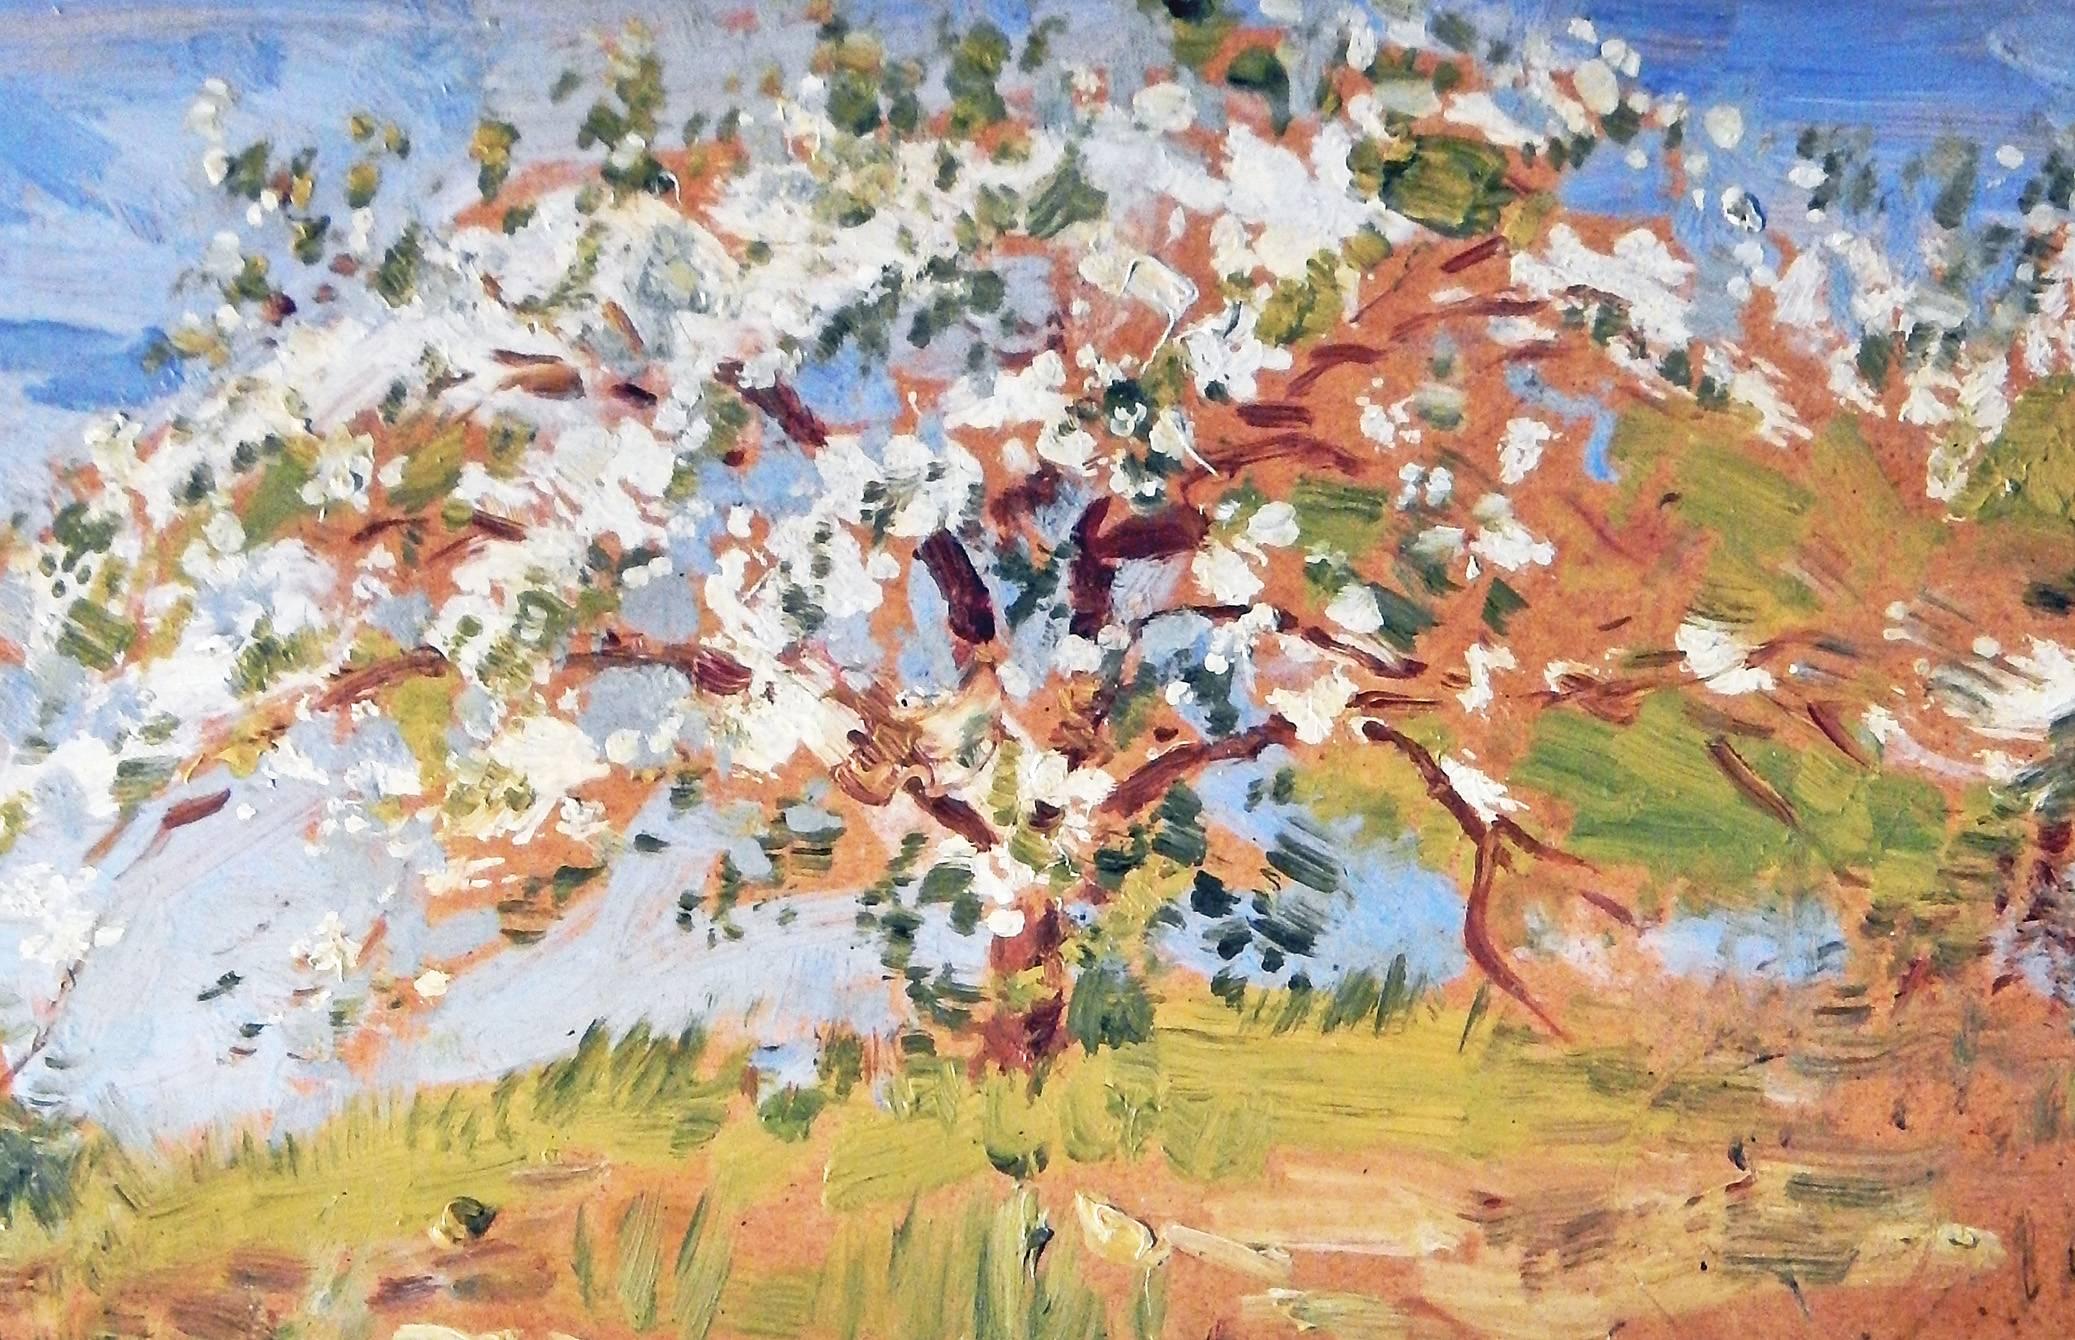 Fresh and light, this lovely Impressionist painting of a spreading apple tree laden with blossoms, reigning over a field brilliant in tones of spring green and gold, was painted by Edward Siebert in the early 20th century. Born in the District of